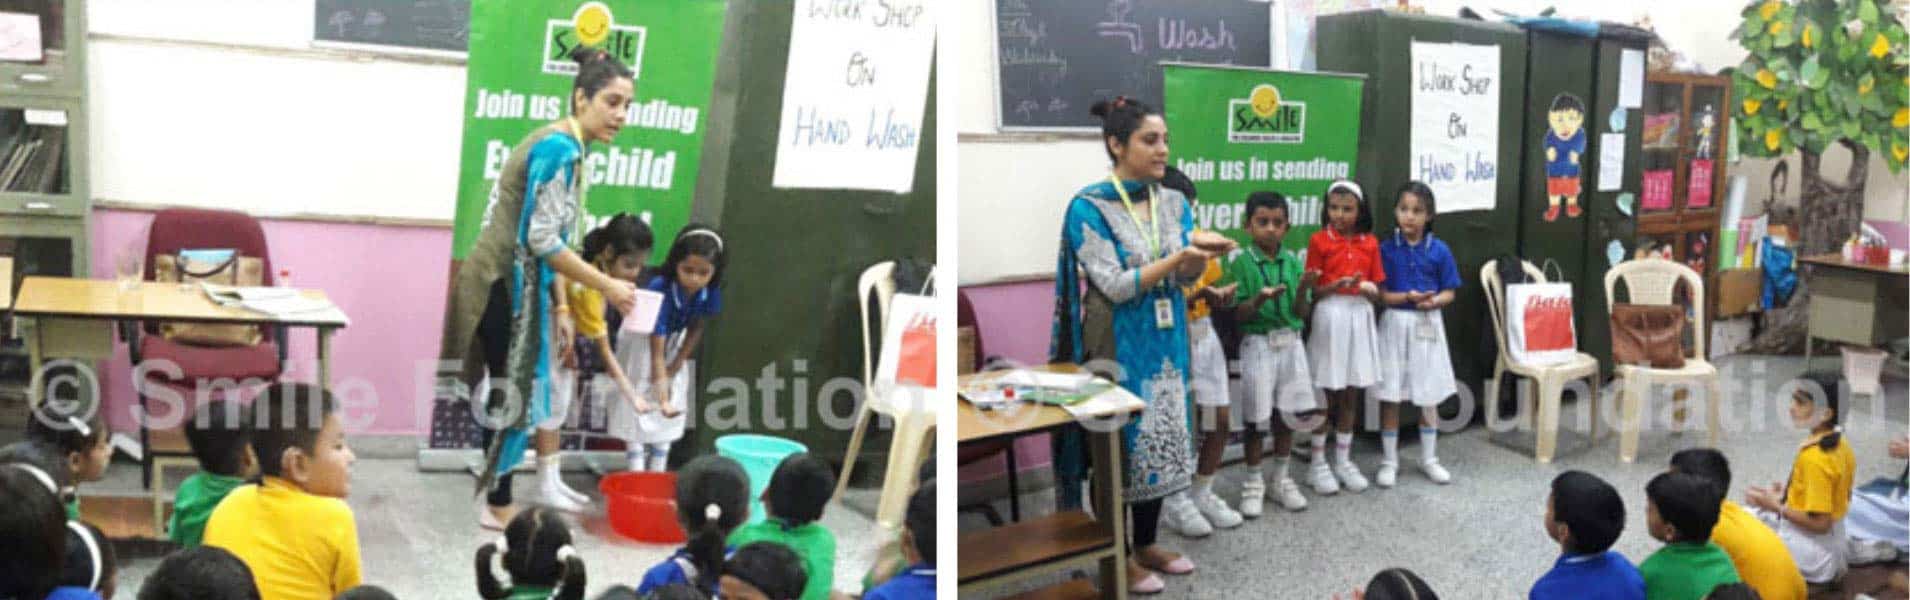 Hand-washing Workshop conducted at Army Public School